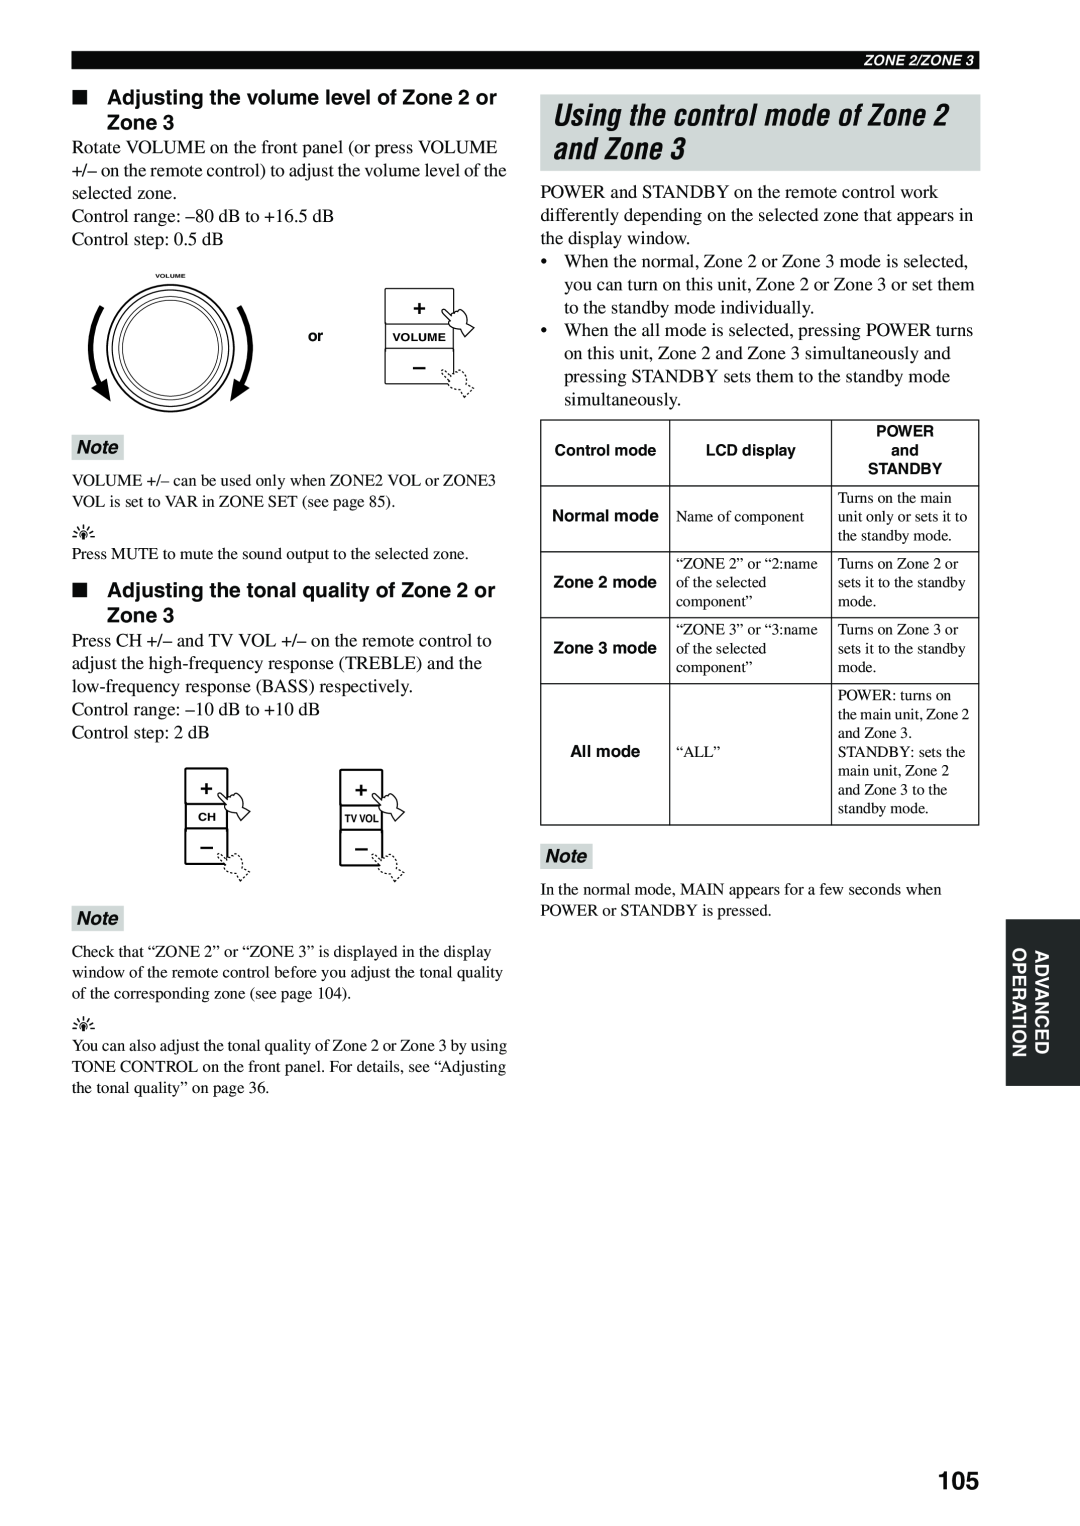 Yamaha HTR-5990 owner manual Using the control mode of Zone 2 and Zone, Adjusting the volume level of Zone 2 or Zone 